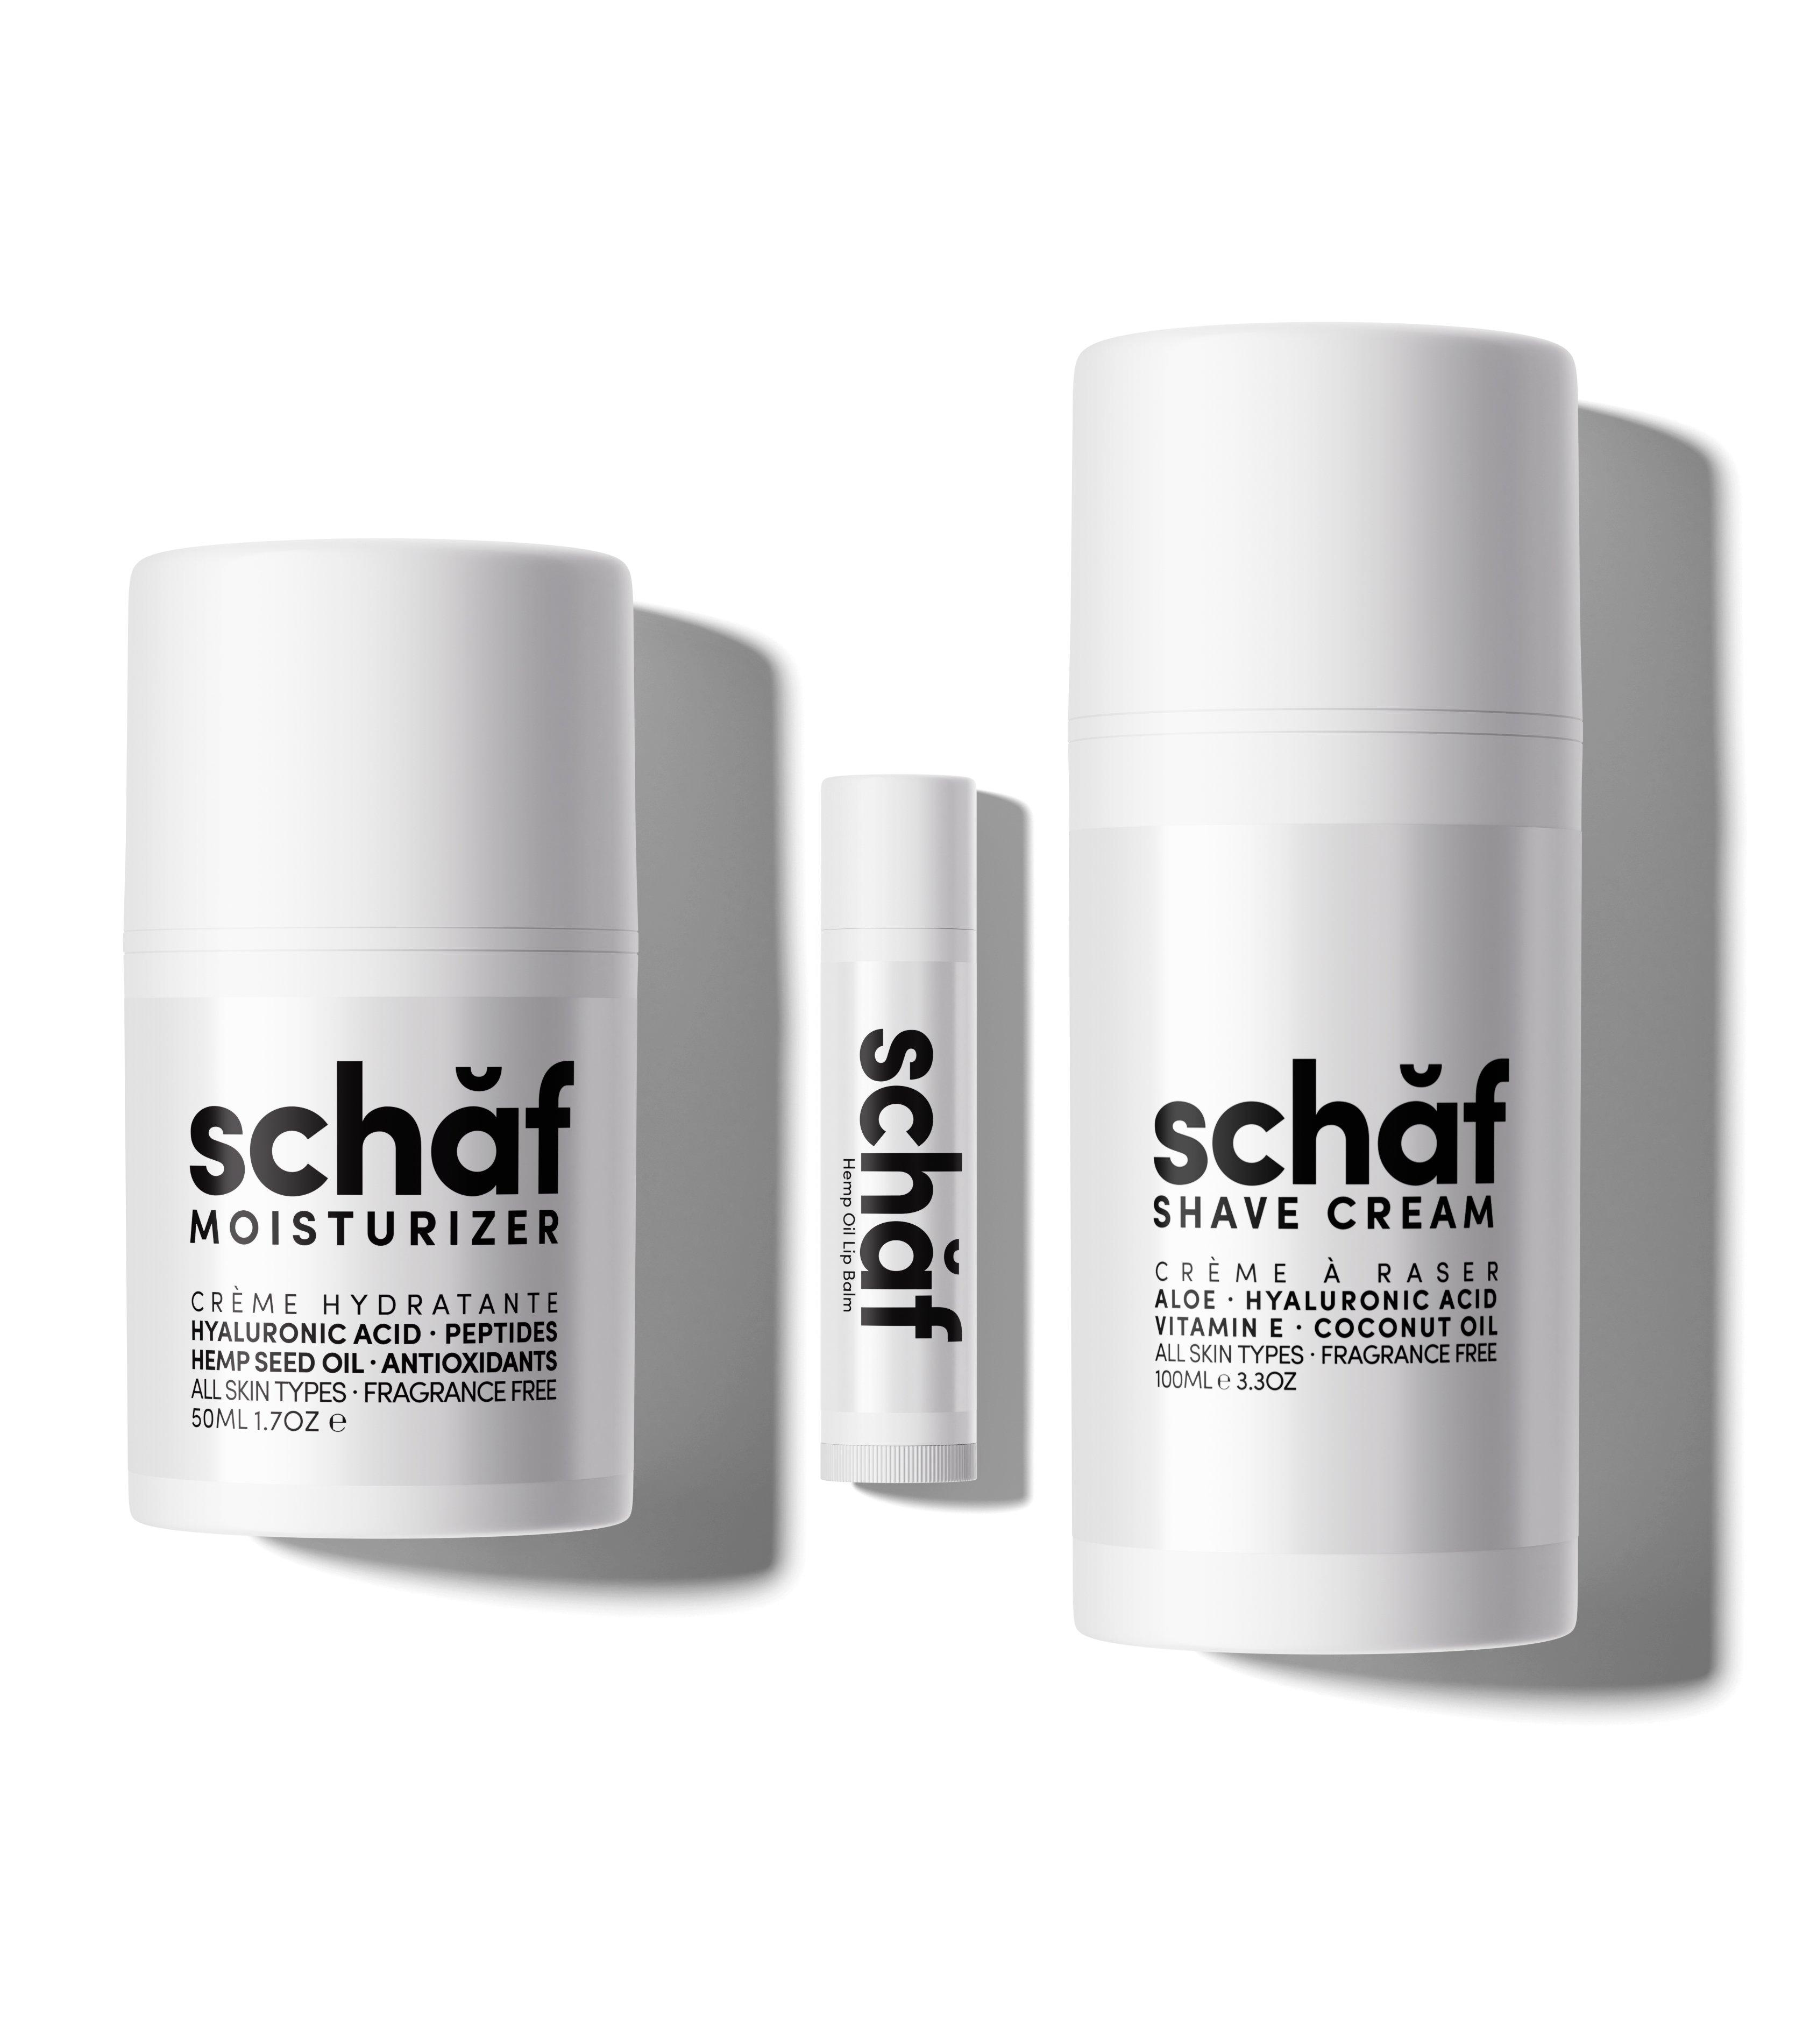  The Schaf Grooming Kit image 0